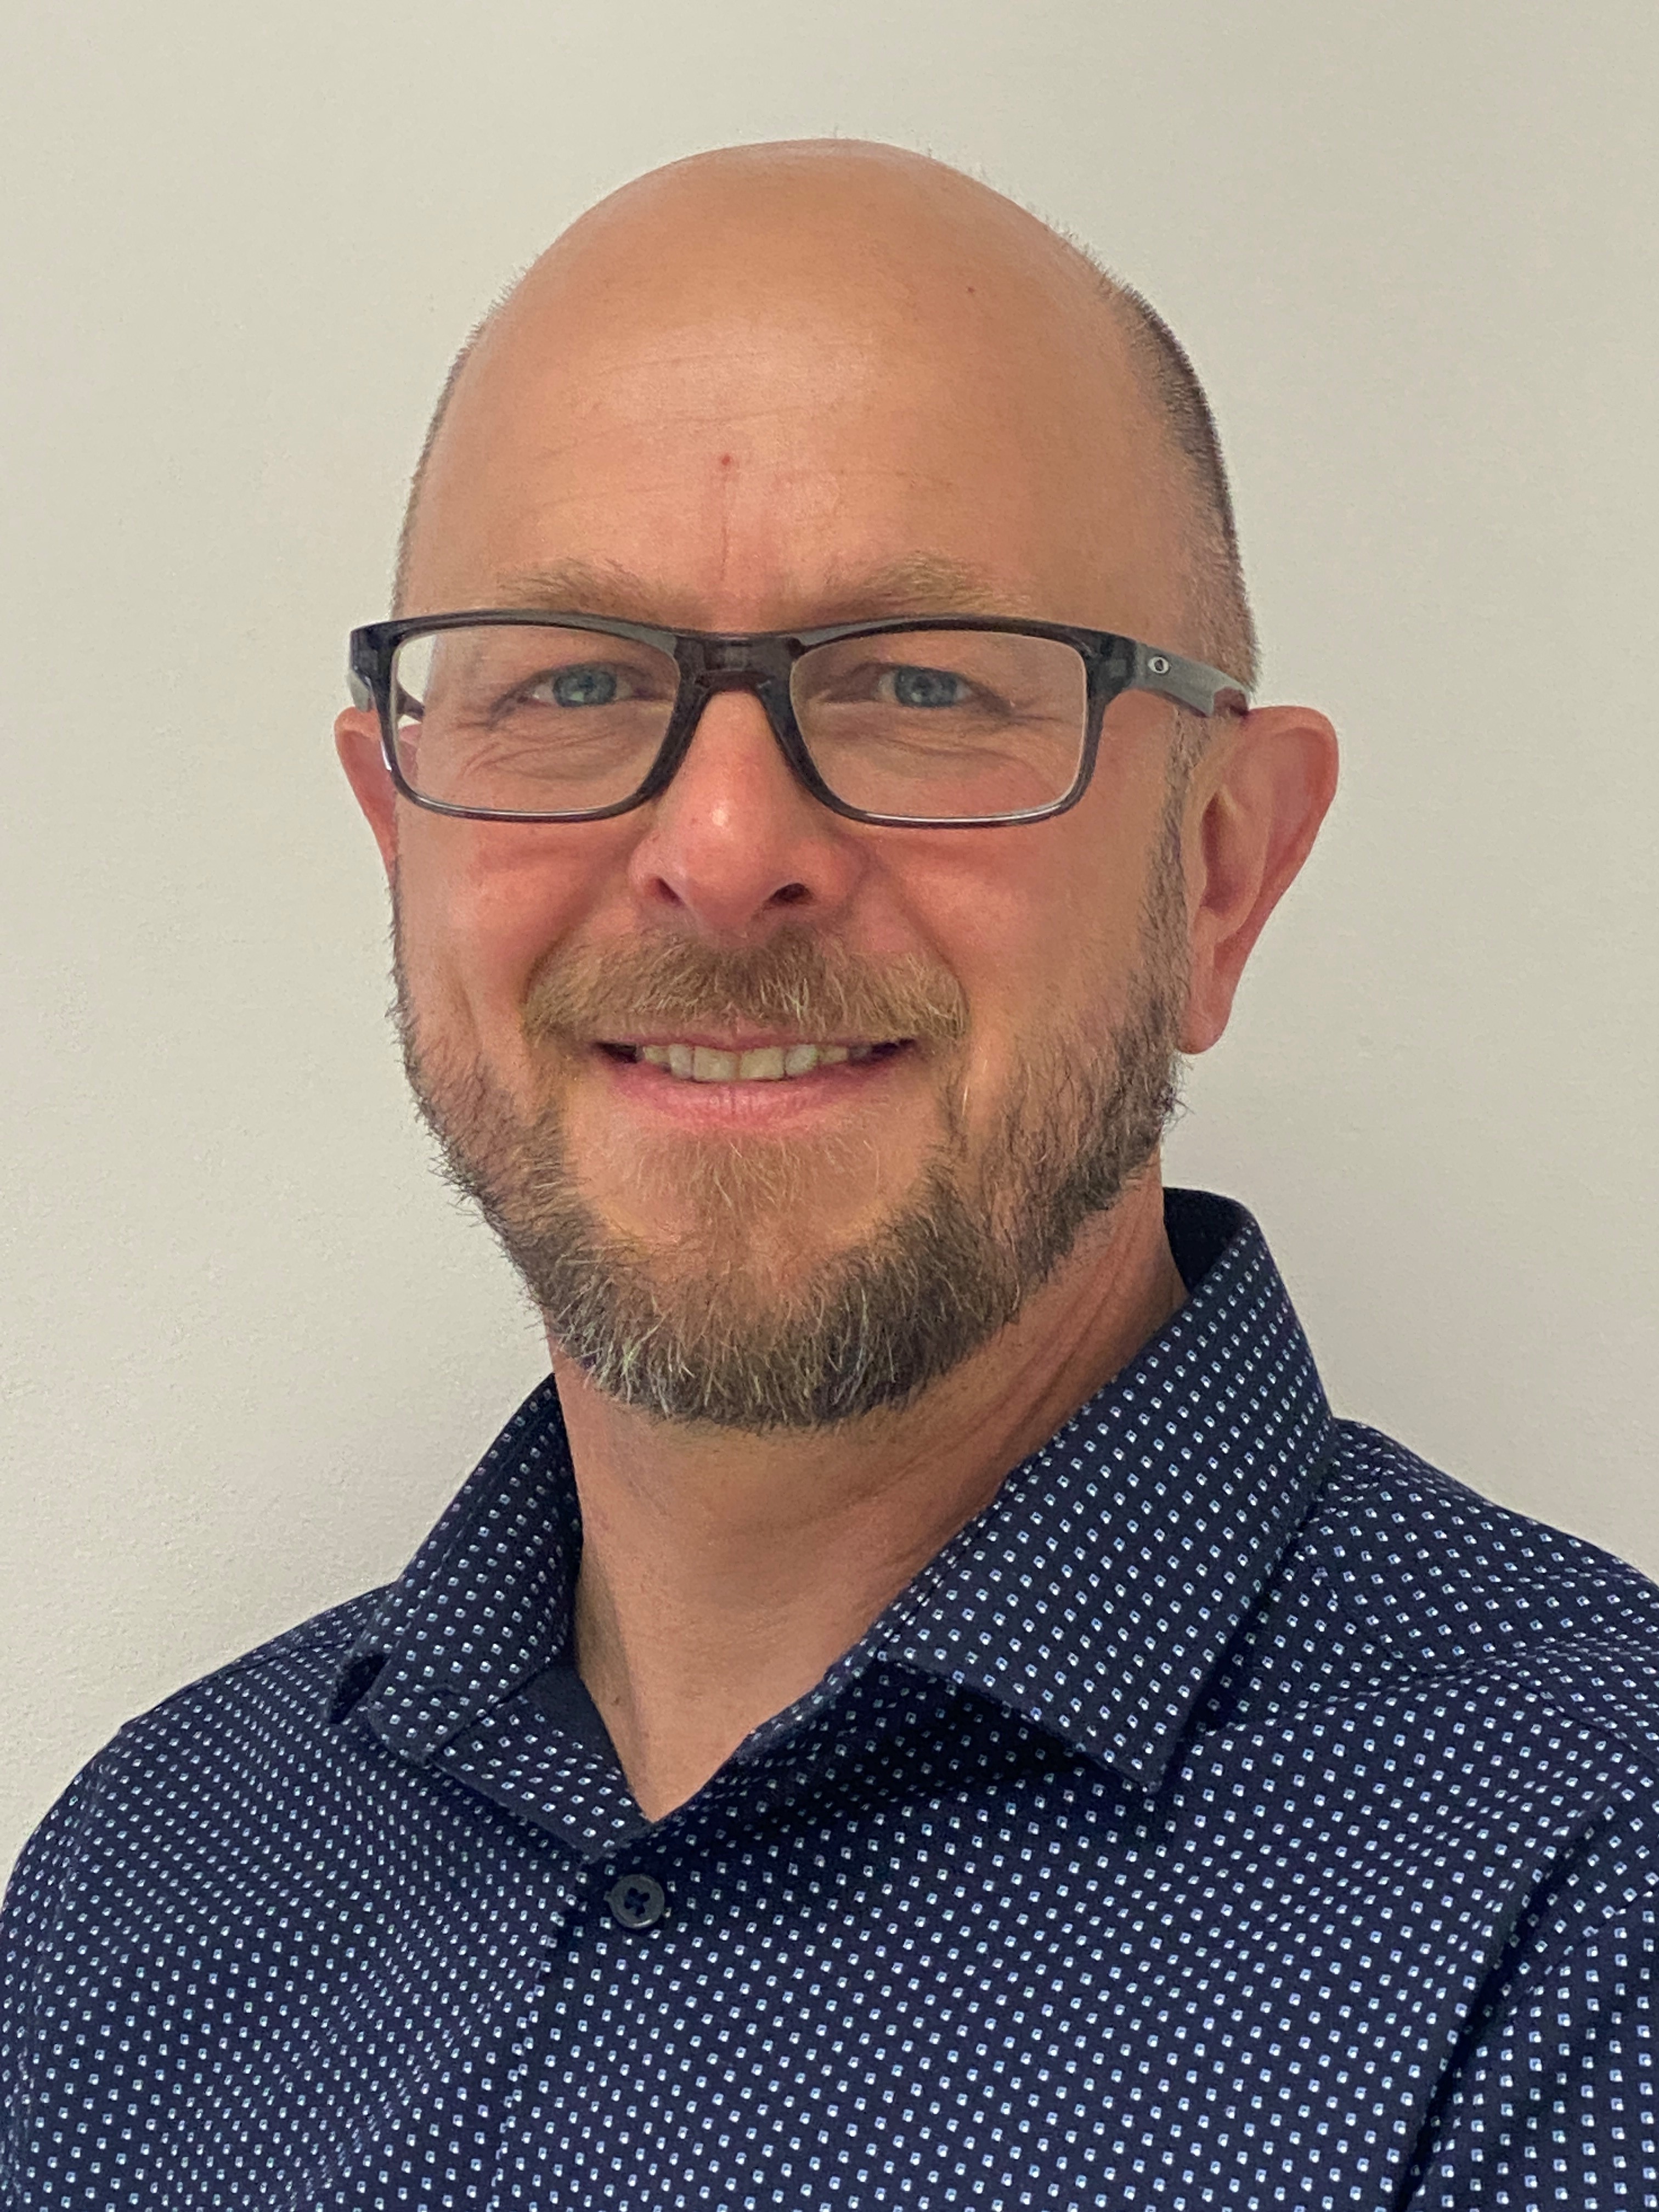 Maxon is delighted to announce that Paul Robinson has joined the engineering team as a Sales Engineer for the UK and Ireland